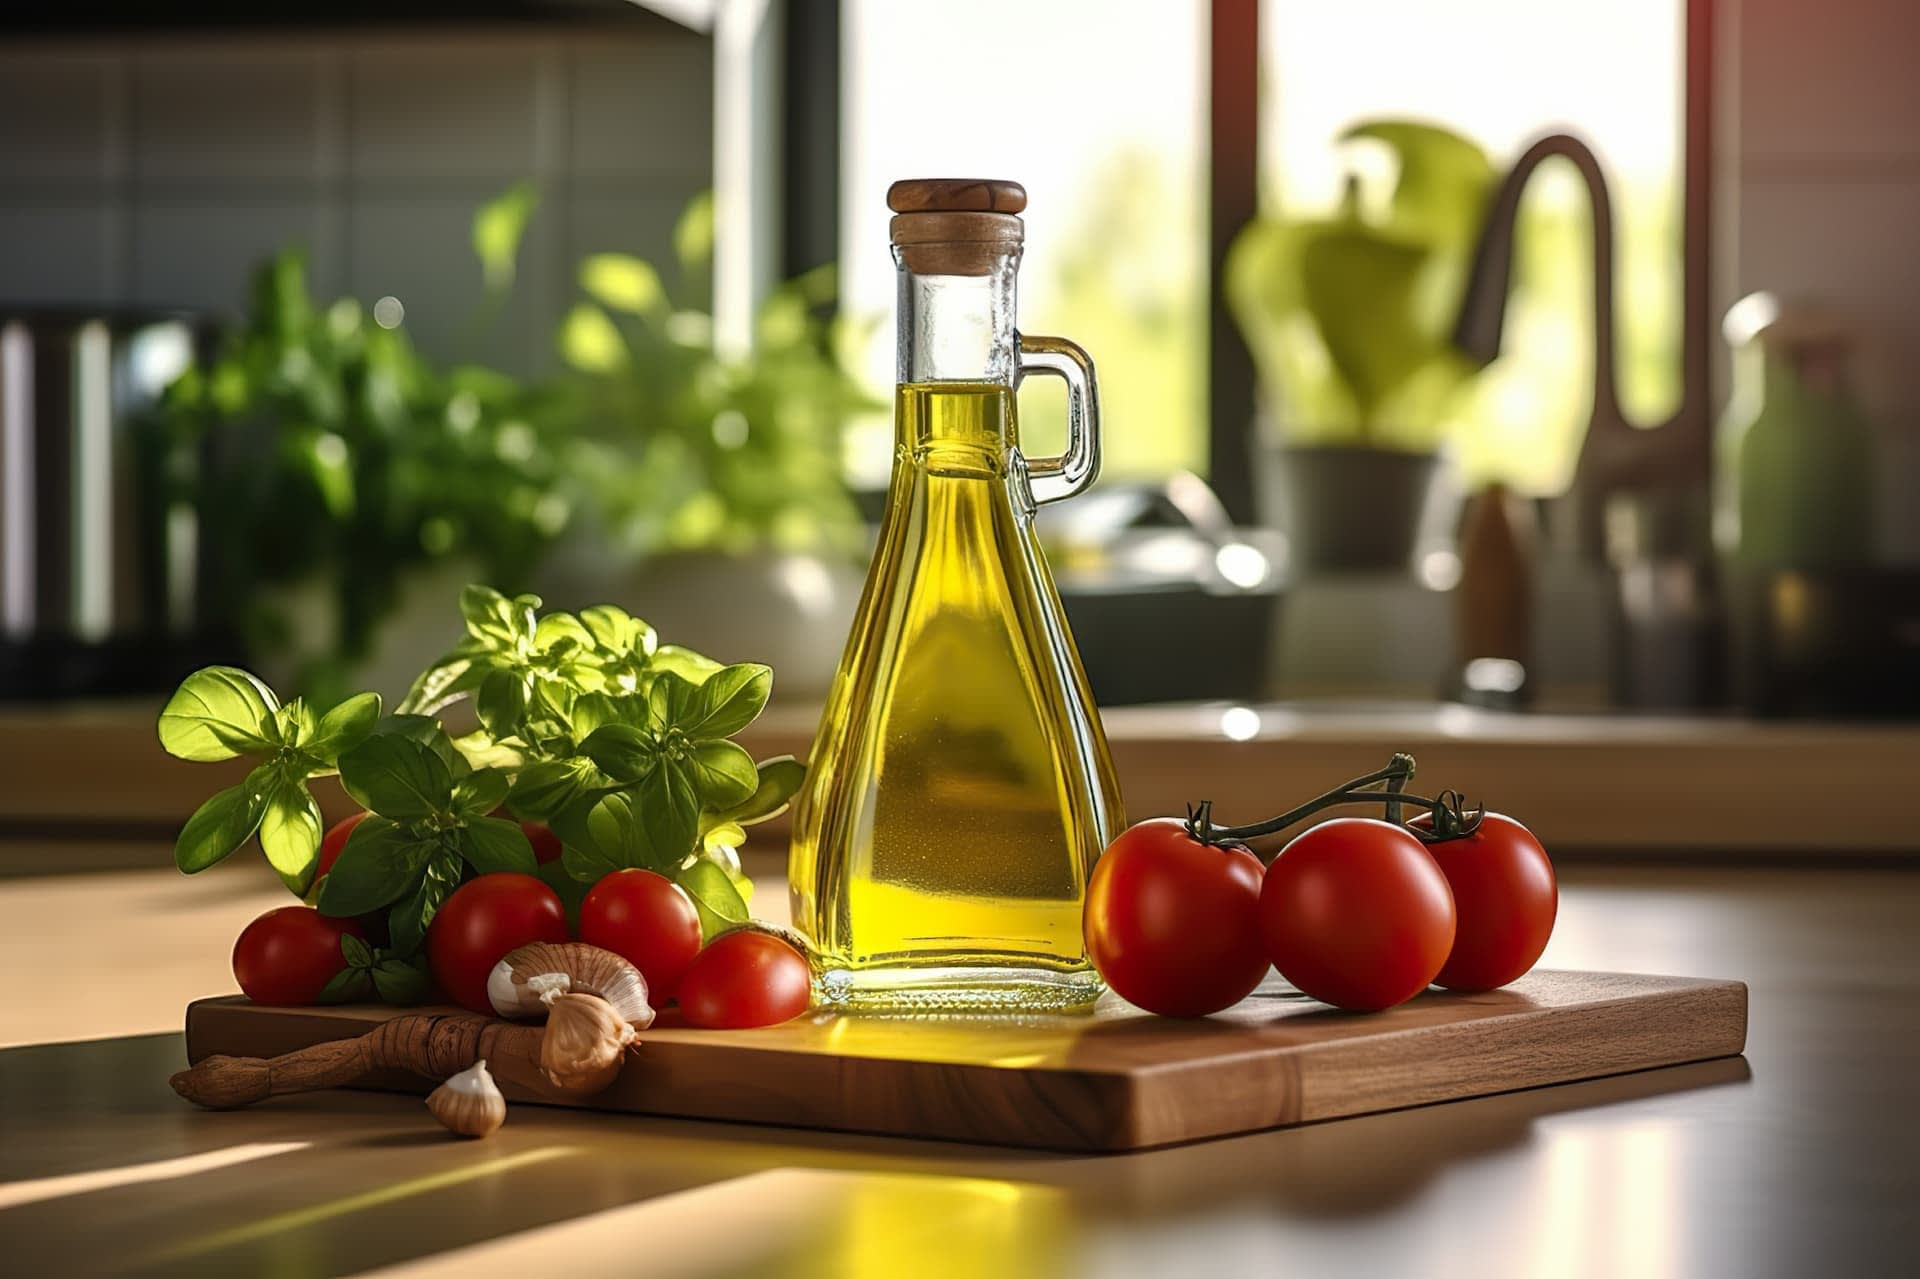 Study evaluates the effects of phenolic compounds in extra virgin olive oil  on skin health